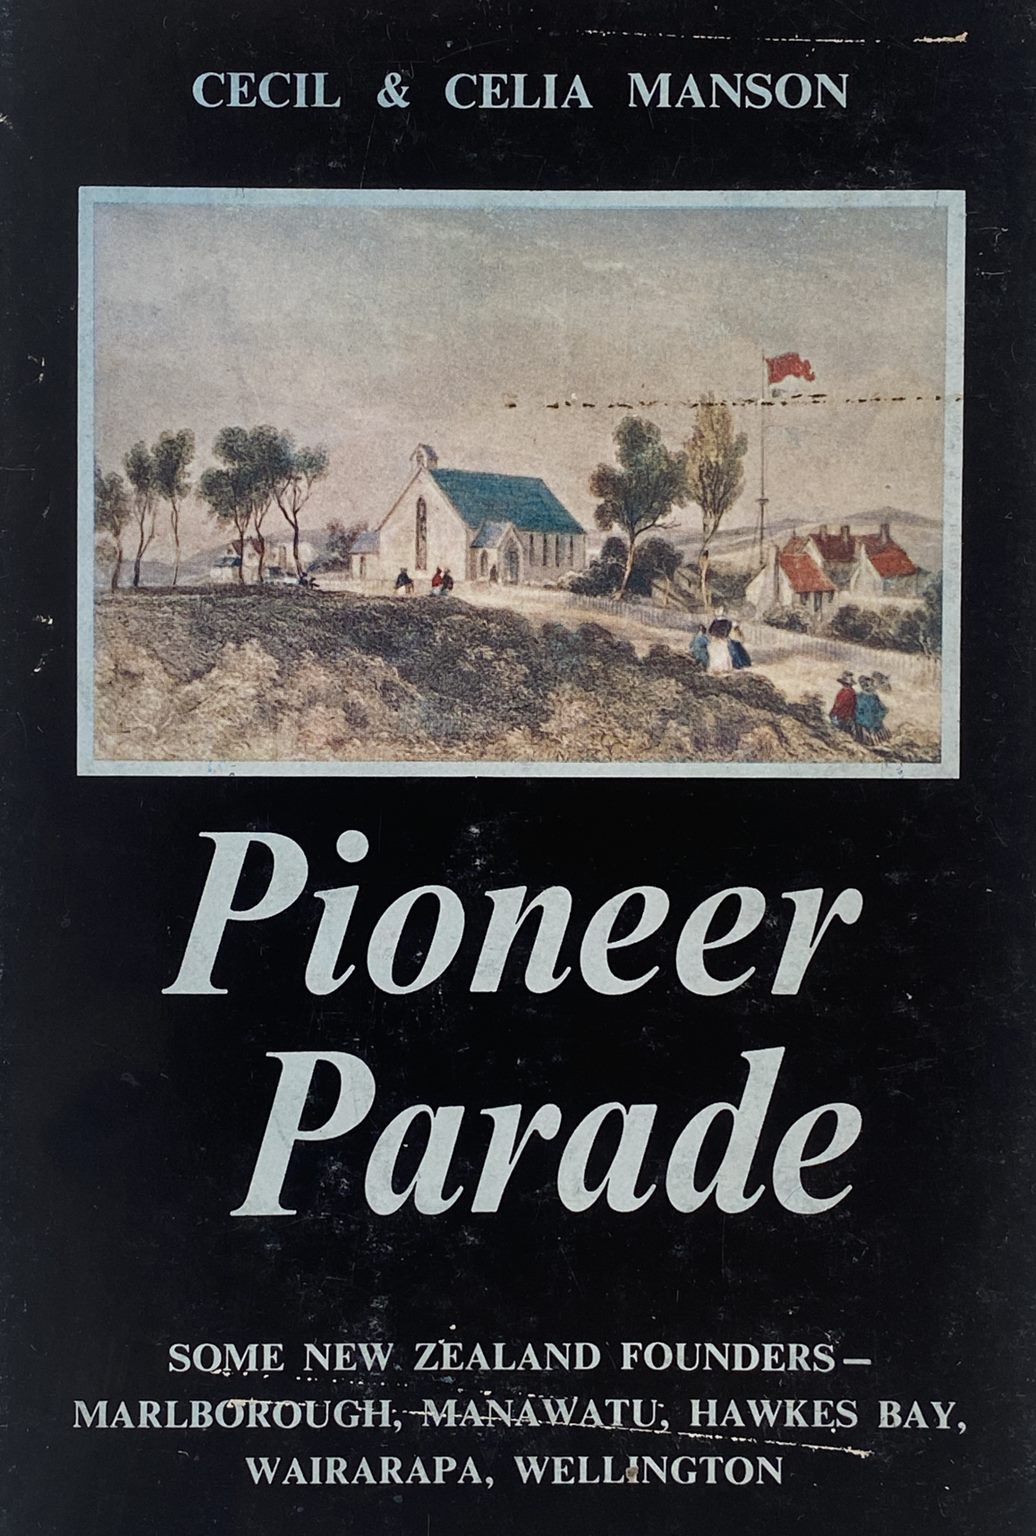 PIONEER PARADE: Some New Zealand Founders